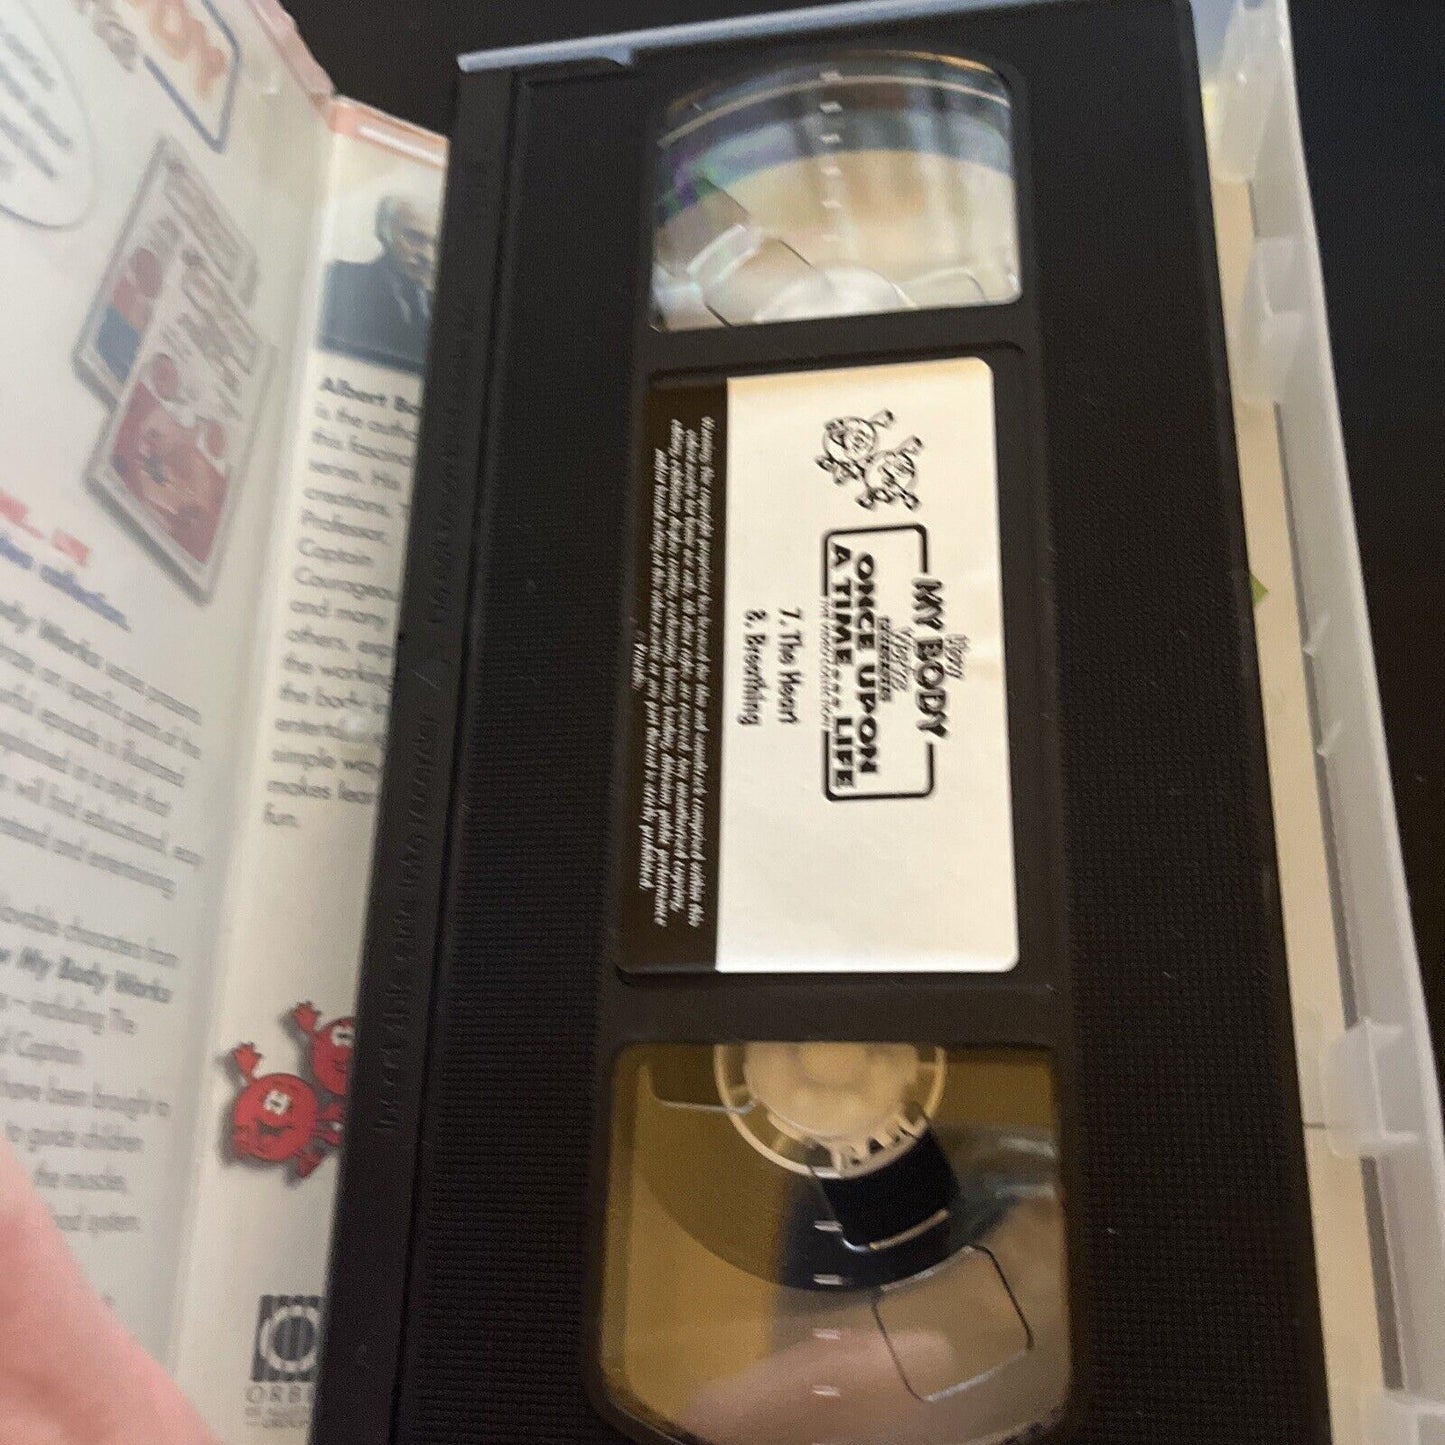 How My Body Works - Once Upon a Time.. Life - Heart & Breathing (VHS ...